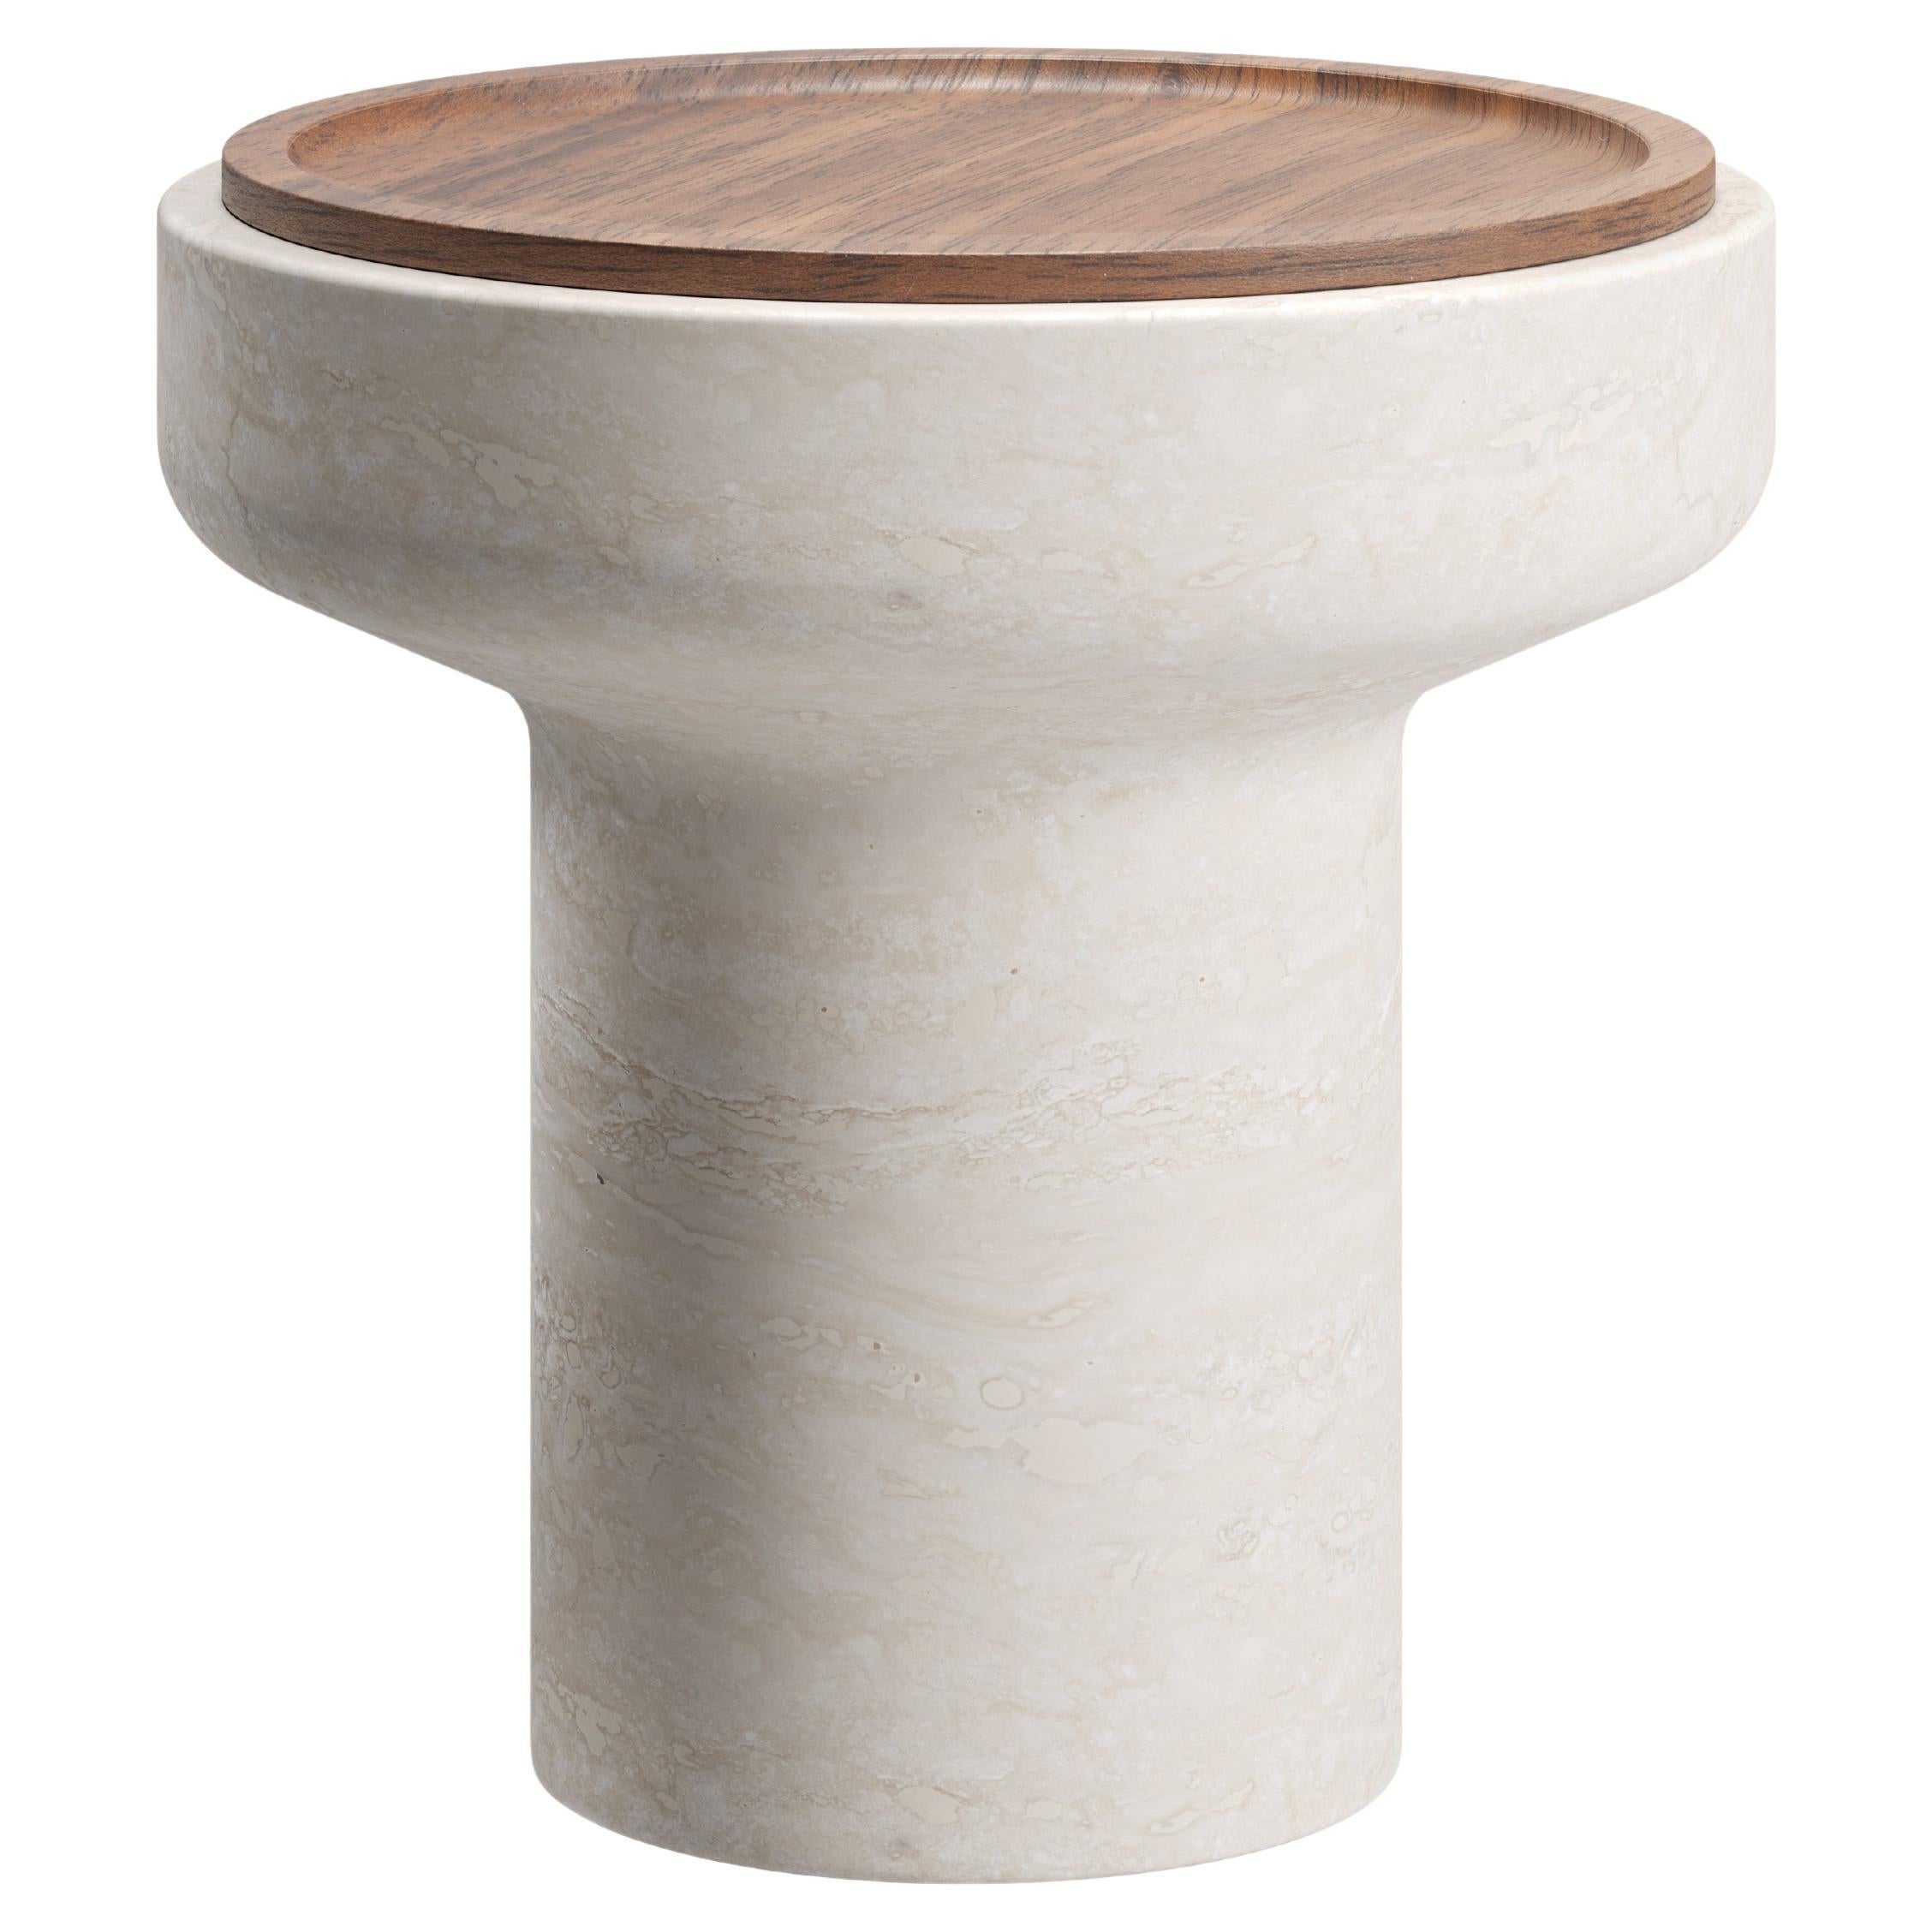 New Modern Side Table in Travertine and Walnut, Designer Ivan Colominas